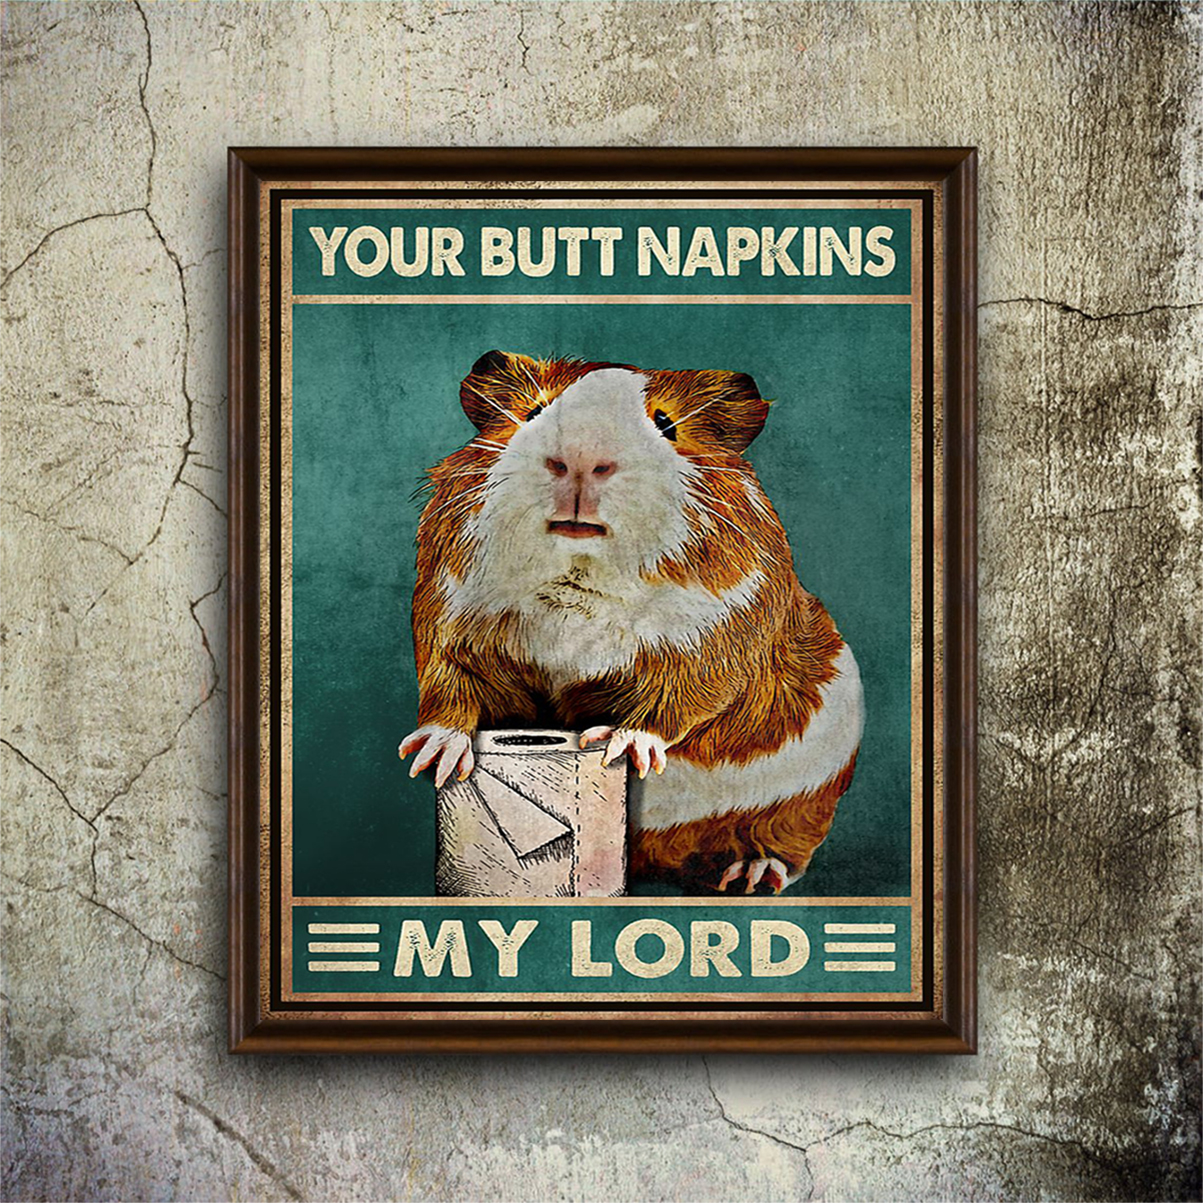 Hamster your butt napkins my lord poster A1